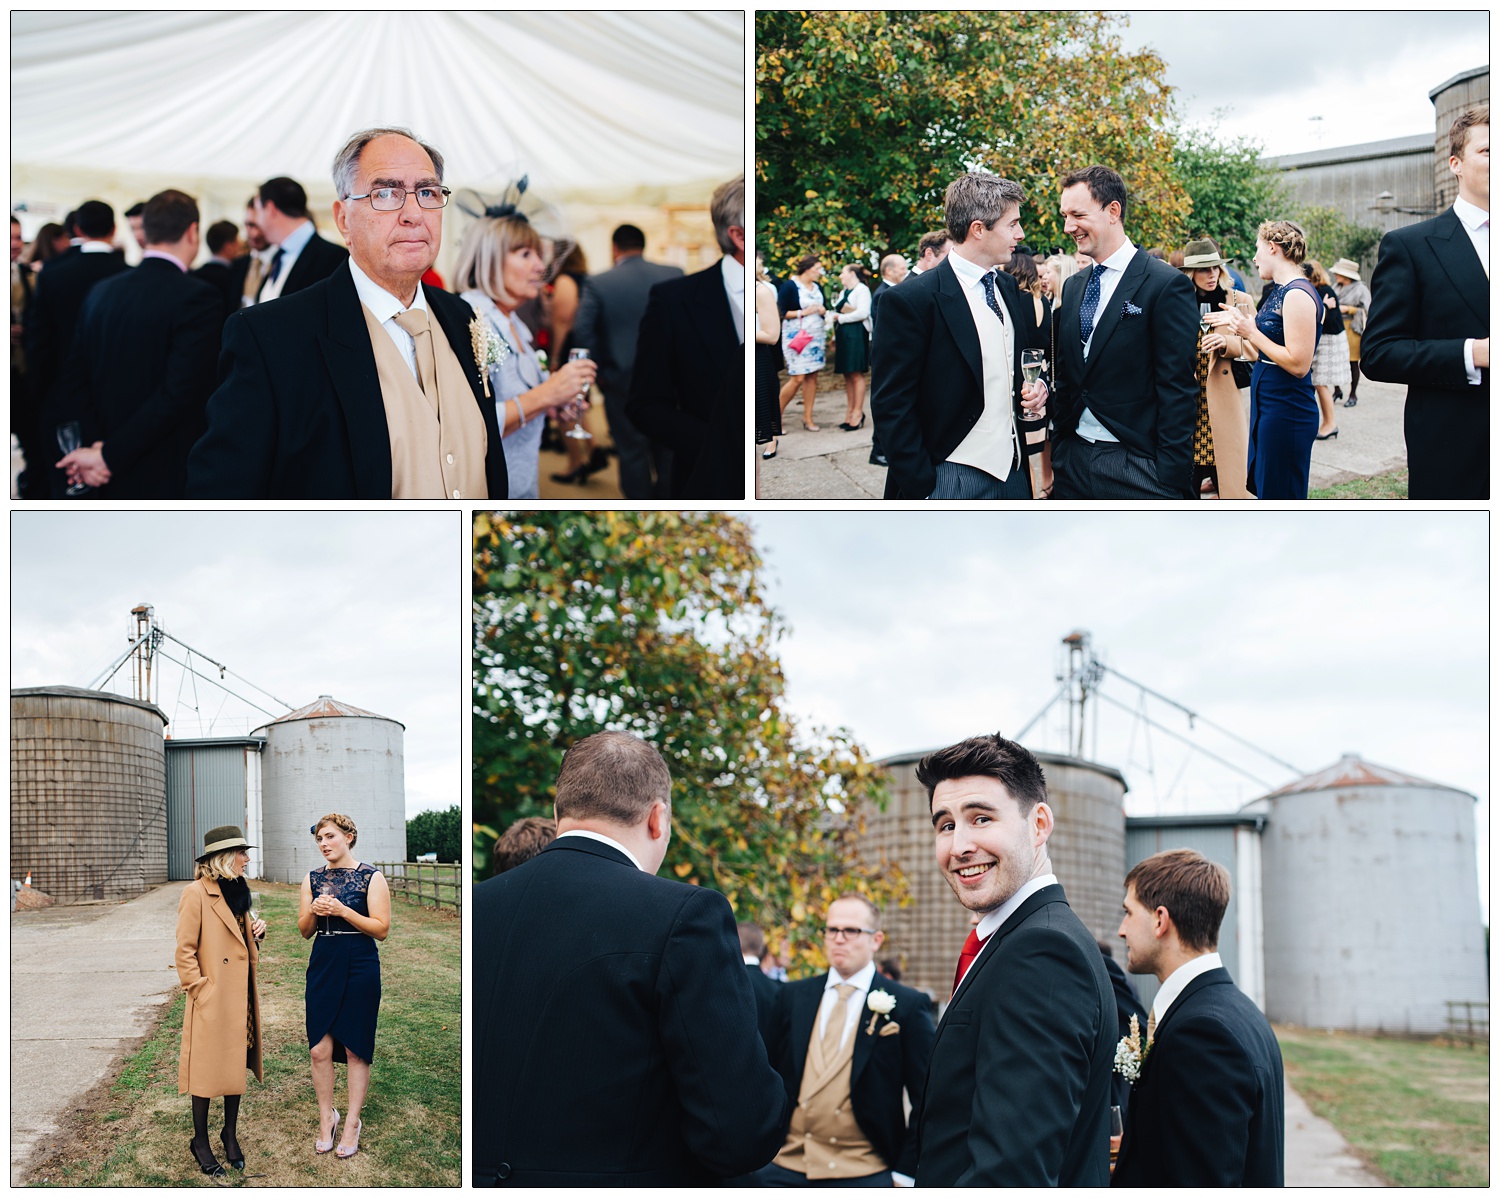 wedding guests chatting outside, the reception is held on a farm and there are silos and trees in the background